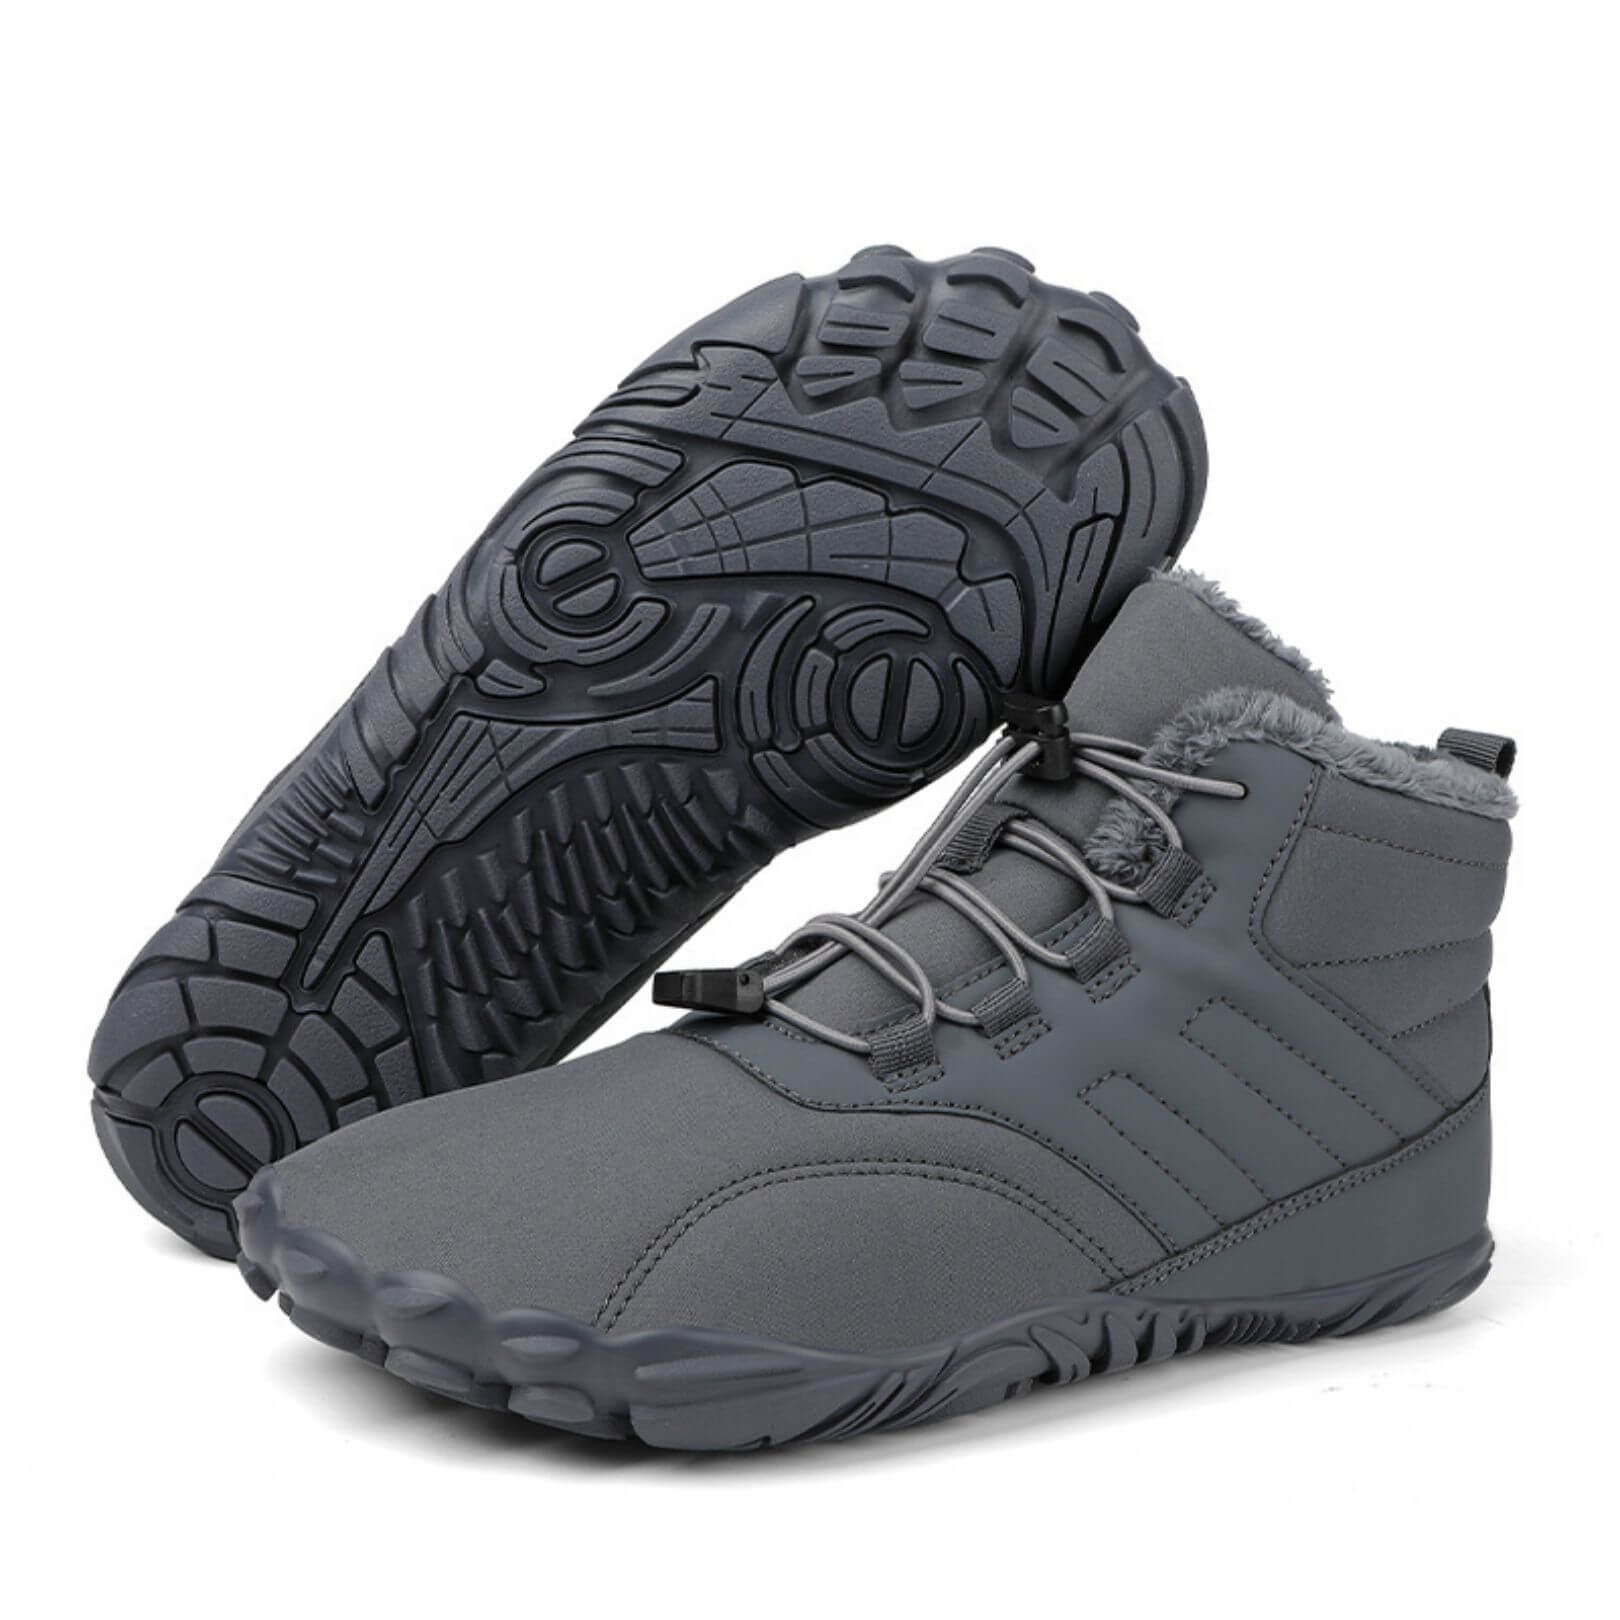 Healthy, Warm & Water-Resistant Barefoot Shoes